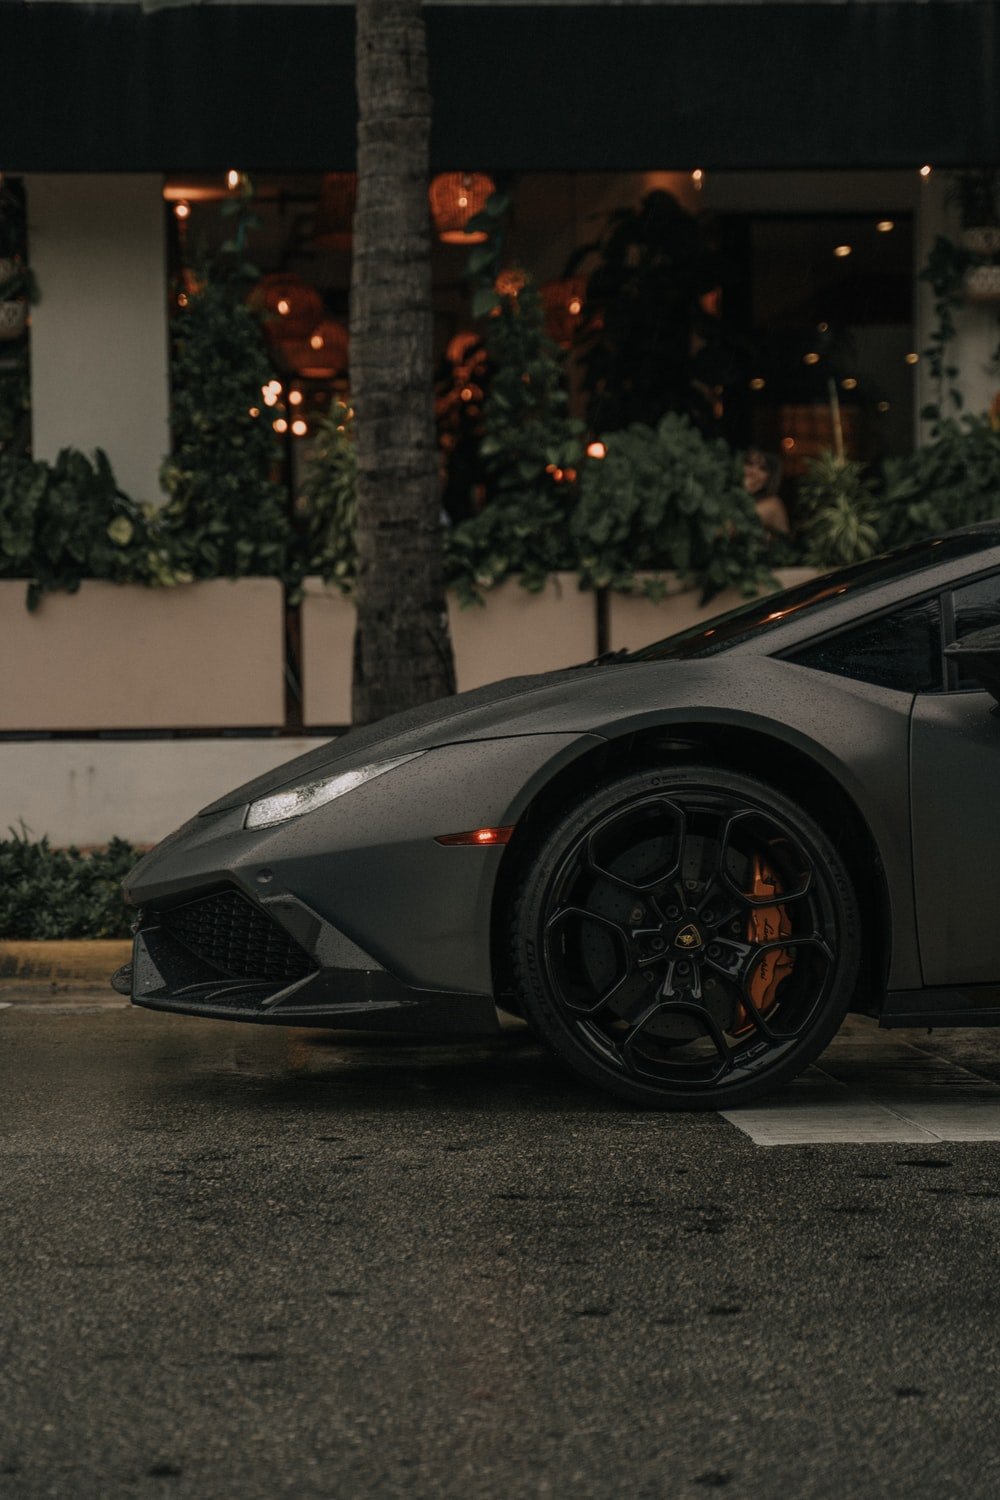 Lambo Picture. Download Free Image